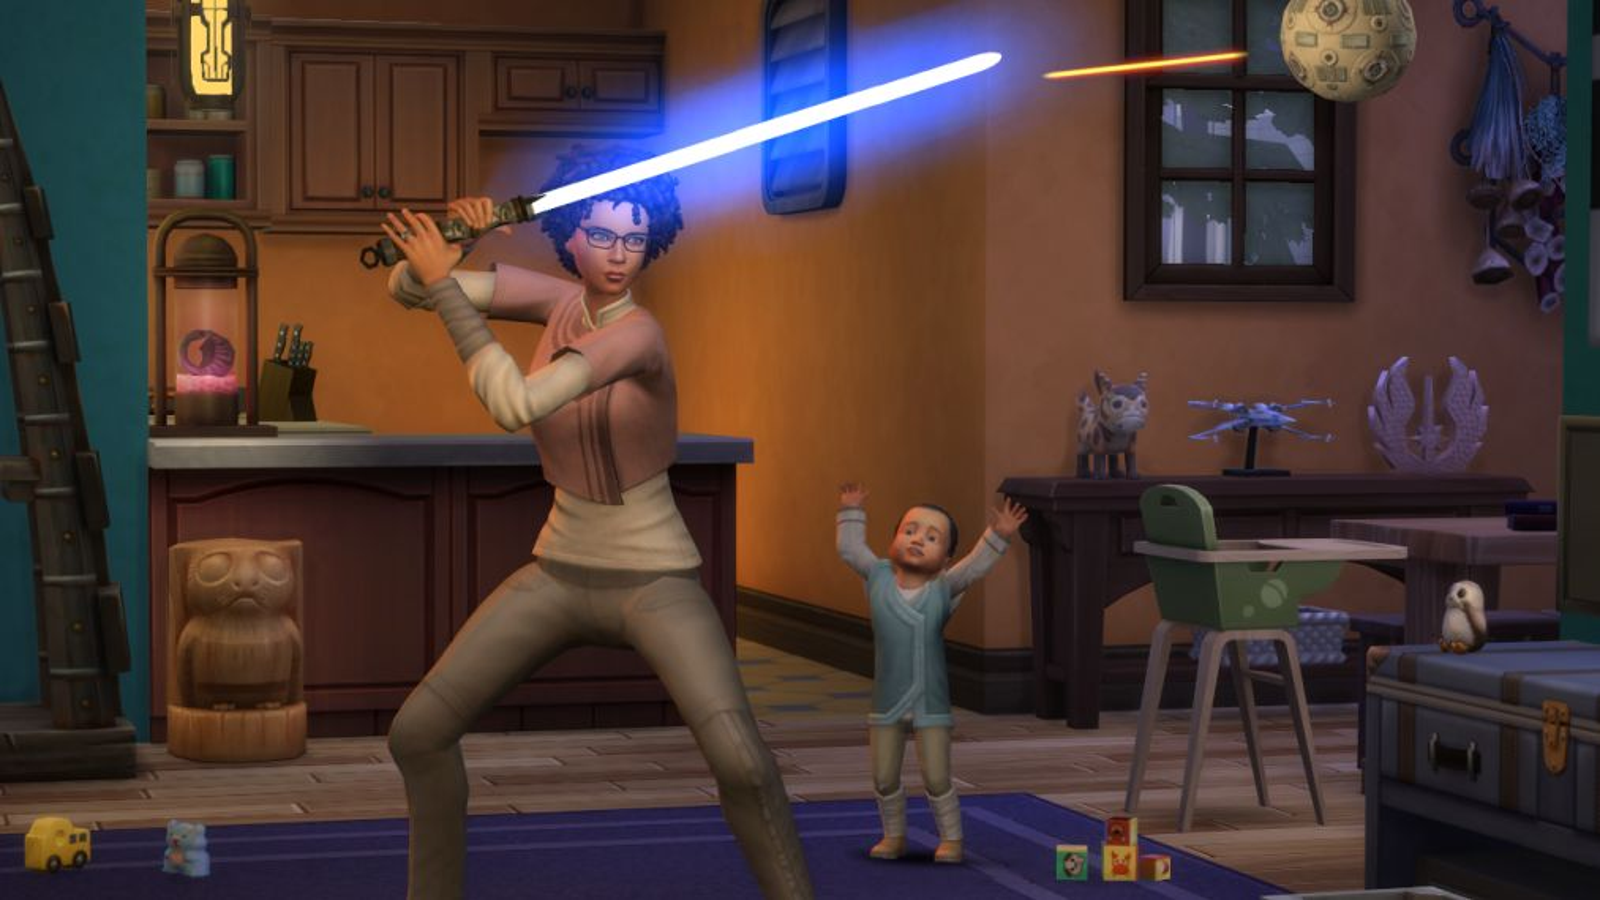 Sims 4: Star Wars - All Cheat Codes